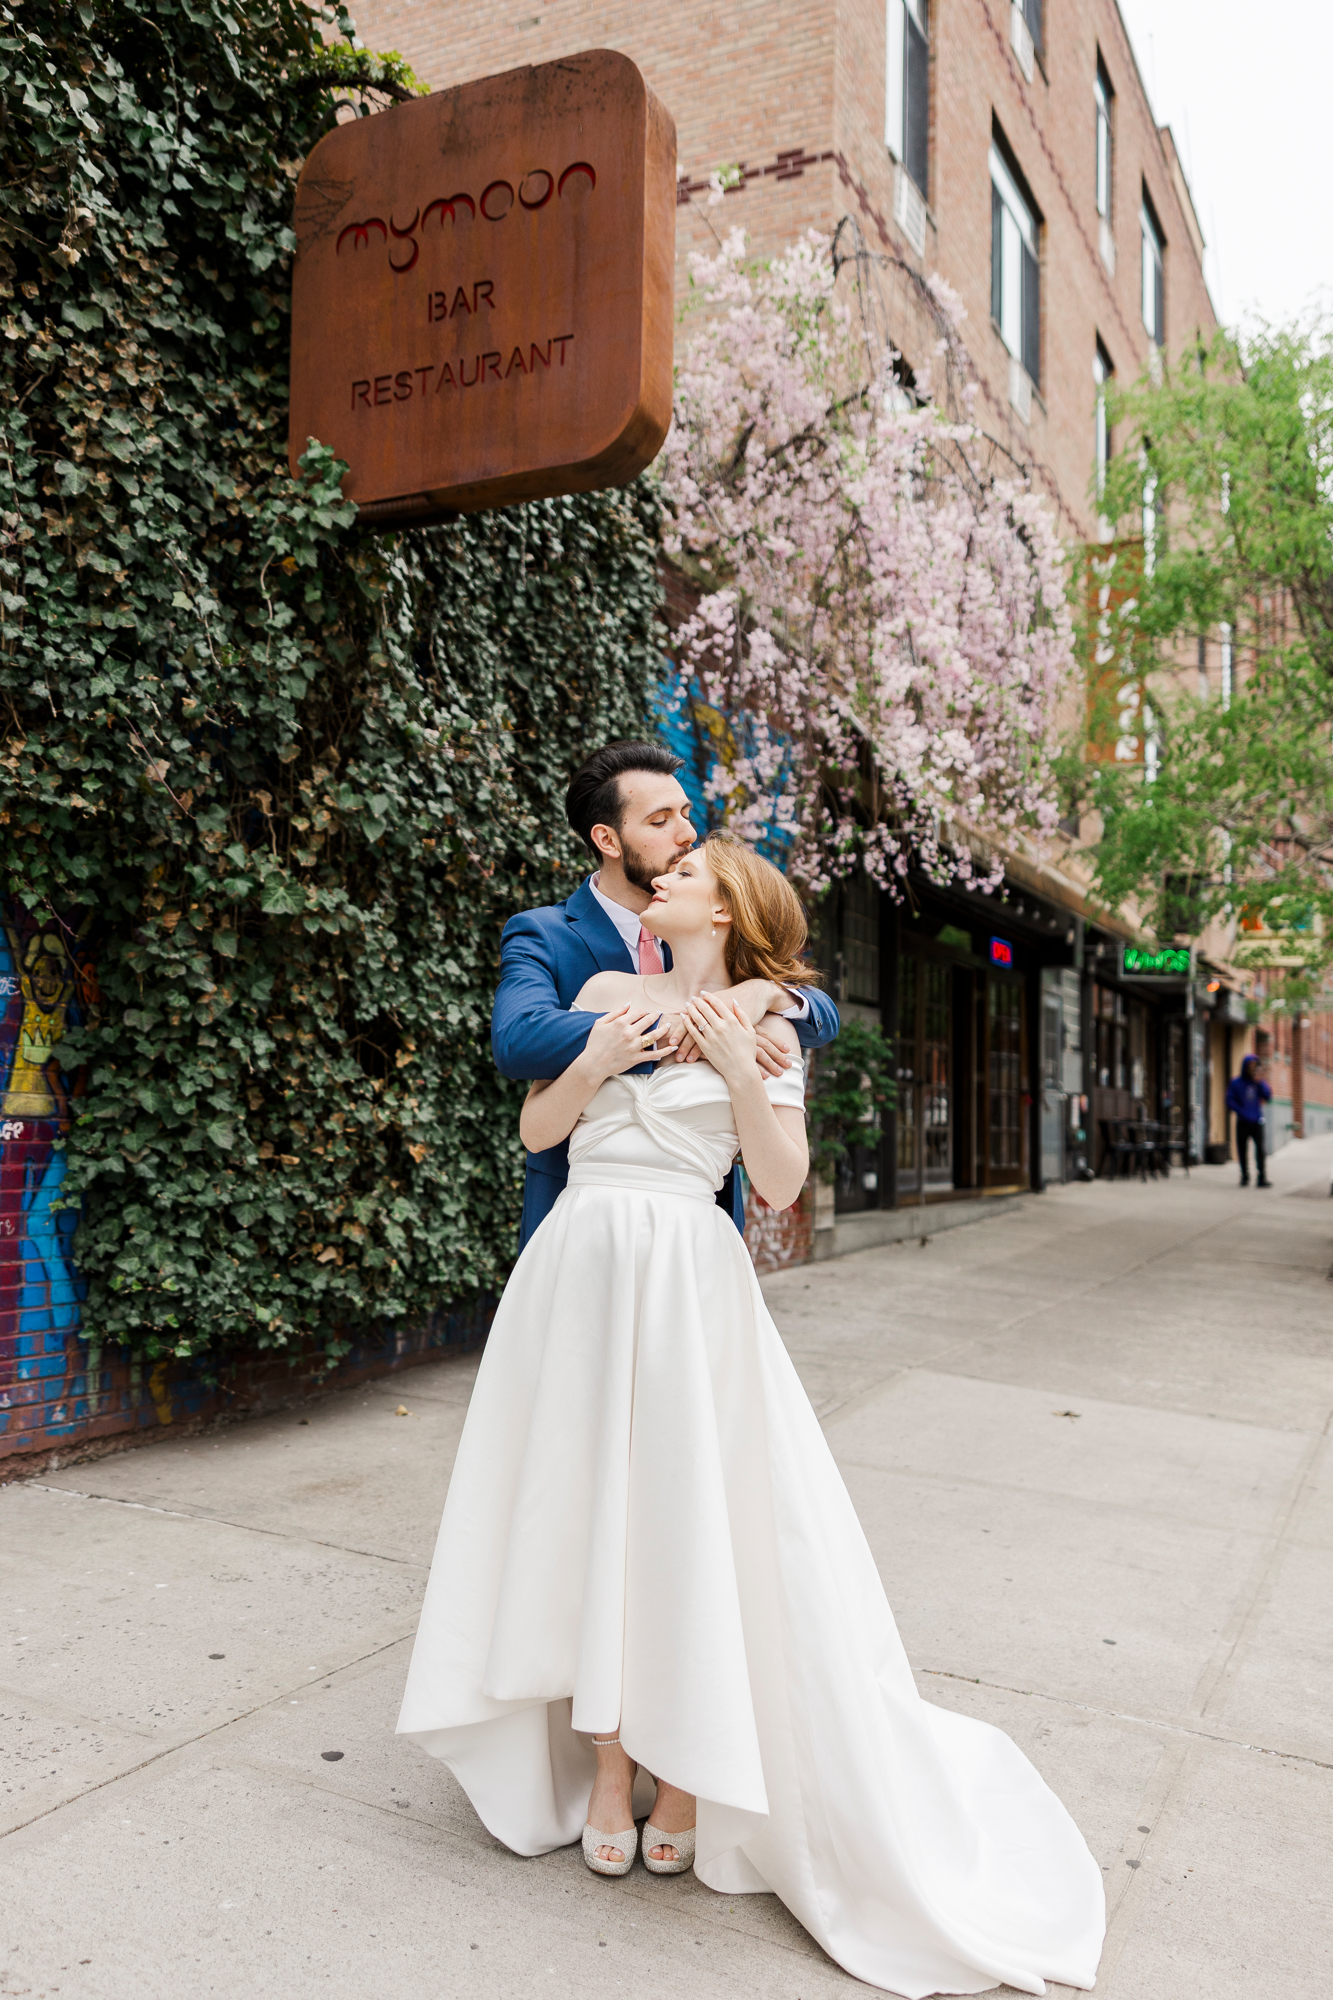 Jaw-Dropping Springtime Blossom Wedding Photos At MyMoon